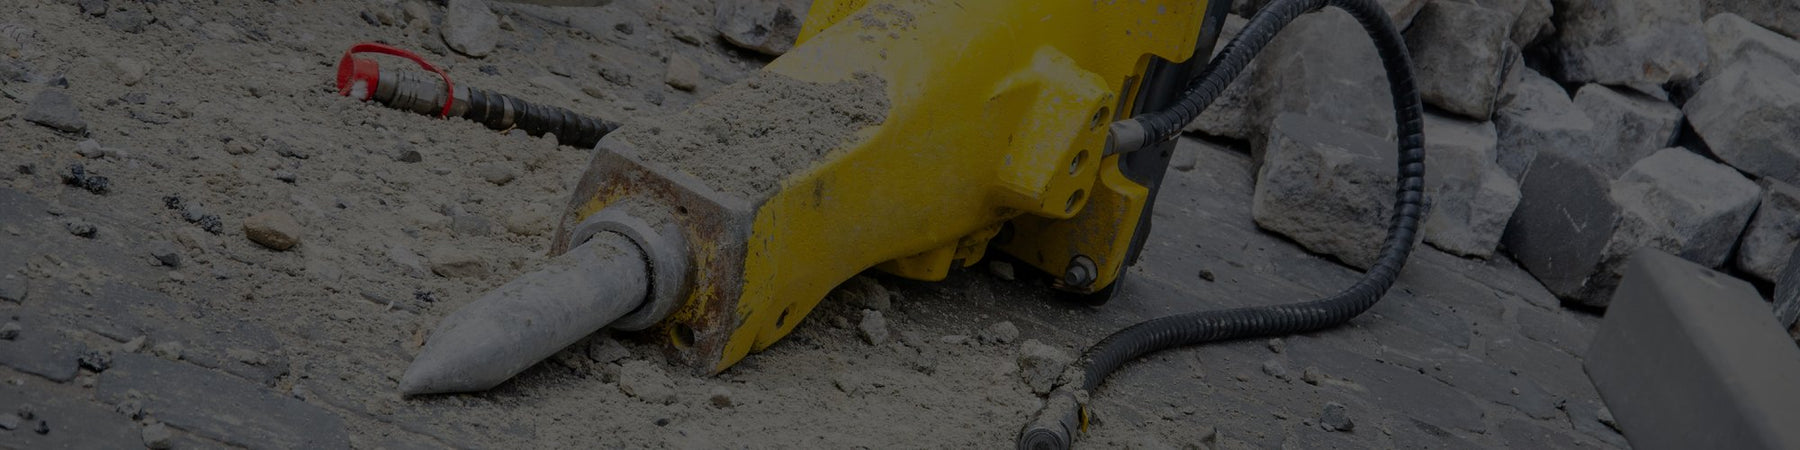 Hydraulic Breakers: Use Cases and Best Practices for Maintenance